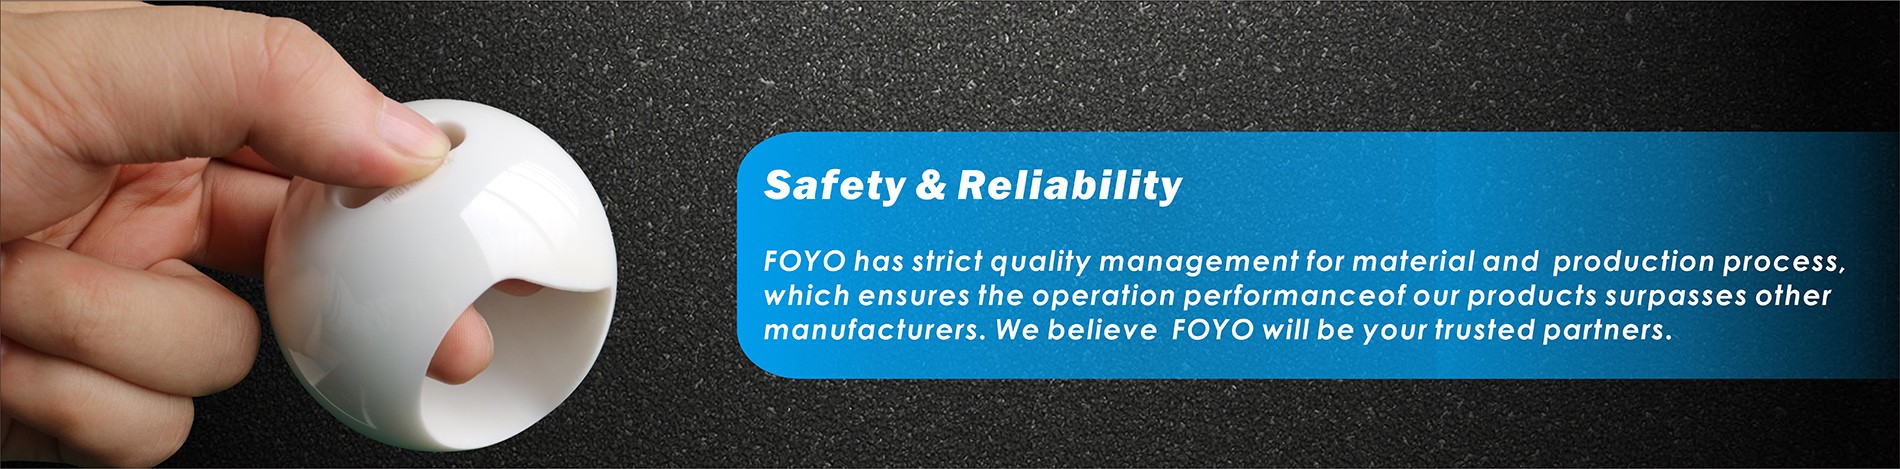 Safety and reliability of FOYO Ceramic Valves